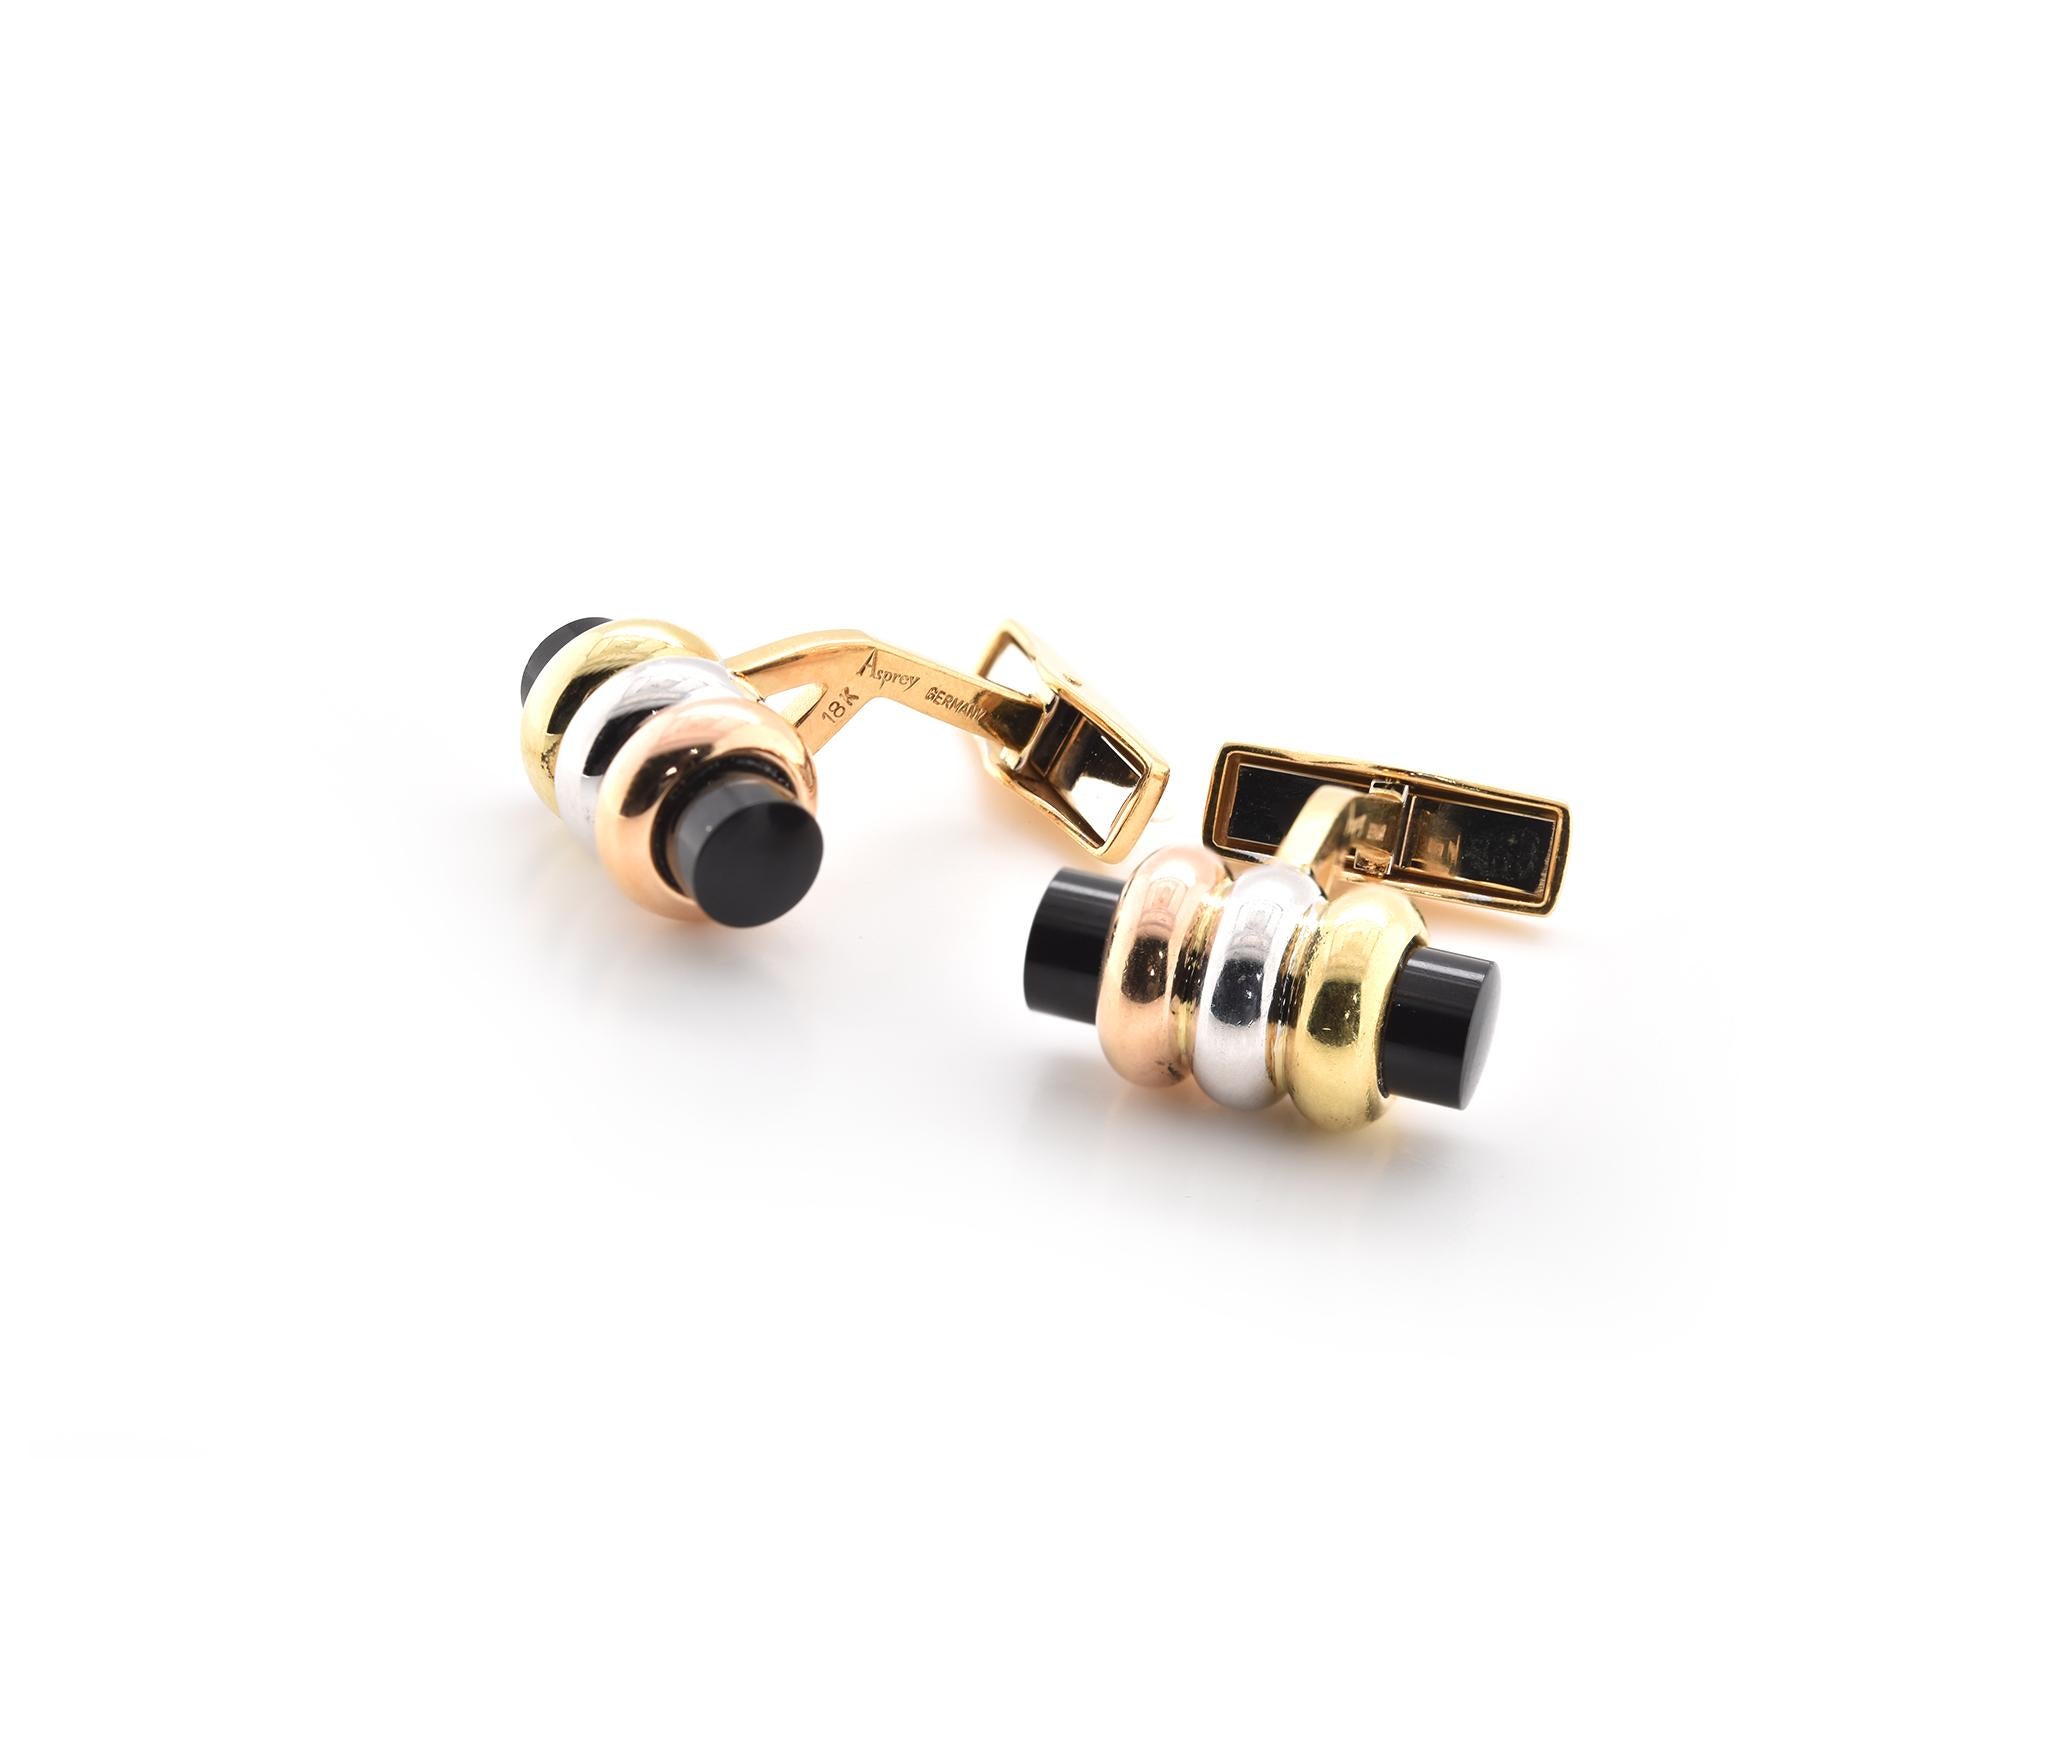 Designer: Asprey
Material: 18k white, rose, and yellow gold
Gemstone: onyx
Dimensions: cufflinks measure 19mm x 26mm
Weight: 15.48 grams
